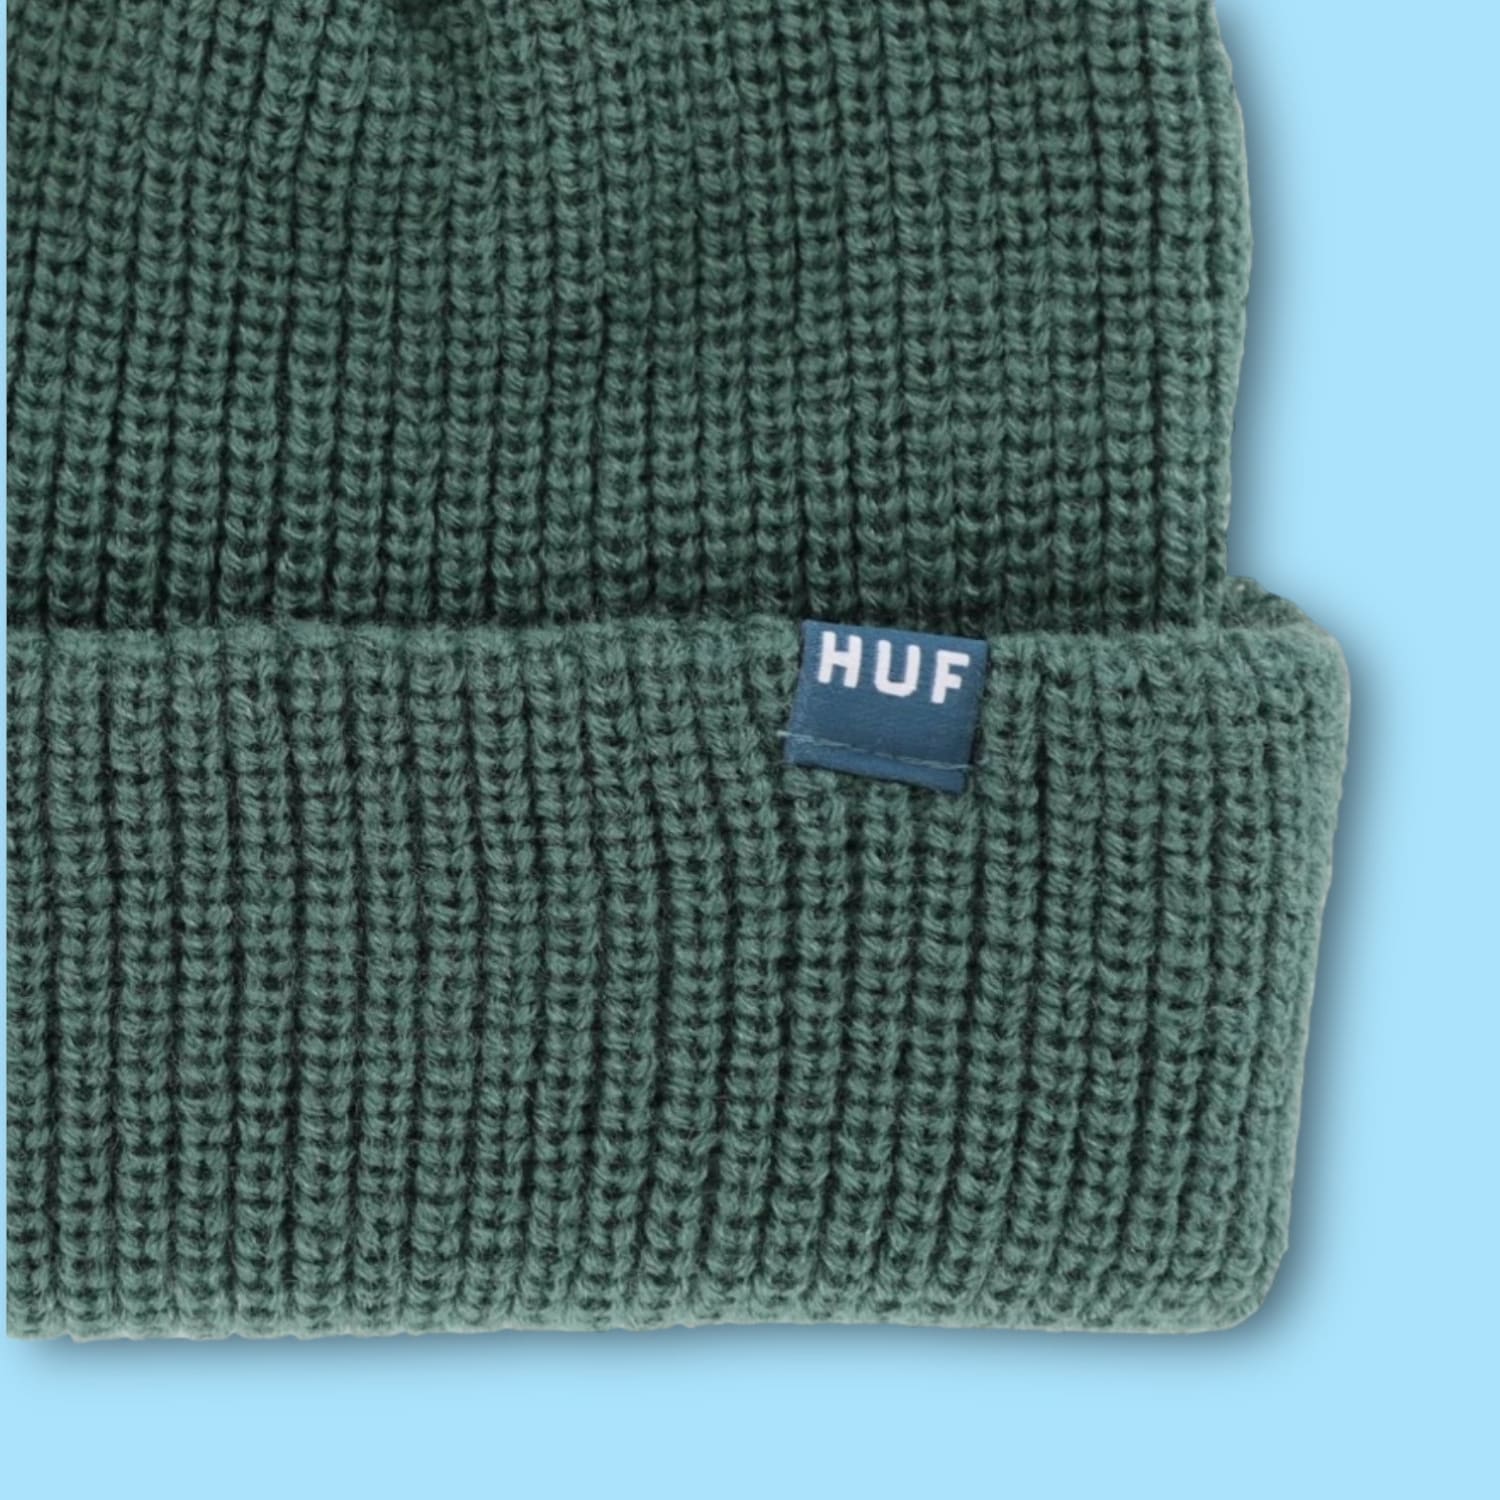 Huf Set Usual Beanie Beanie - Black - Hat - For Dad Gifts